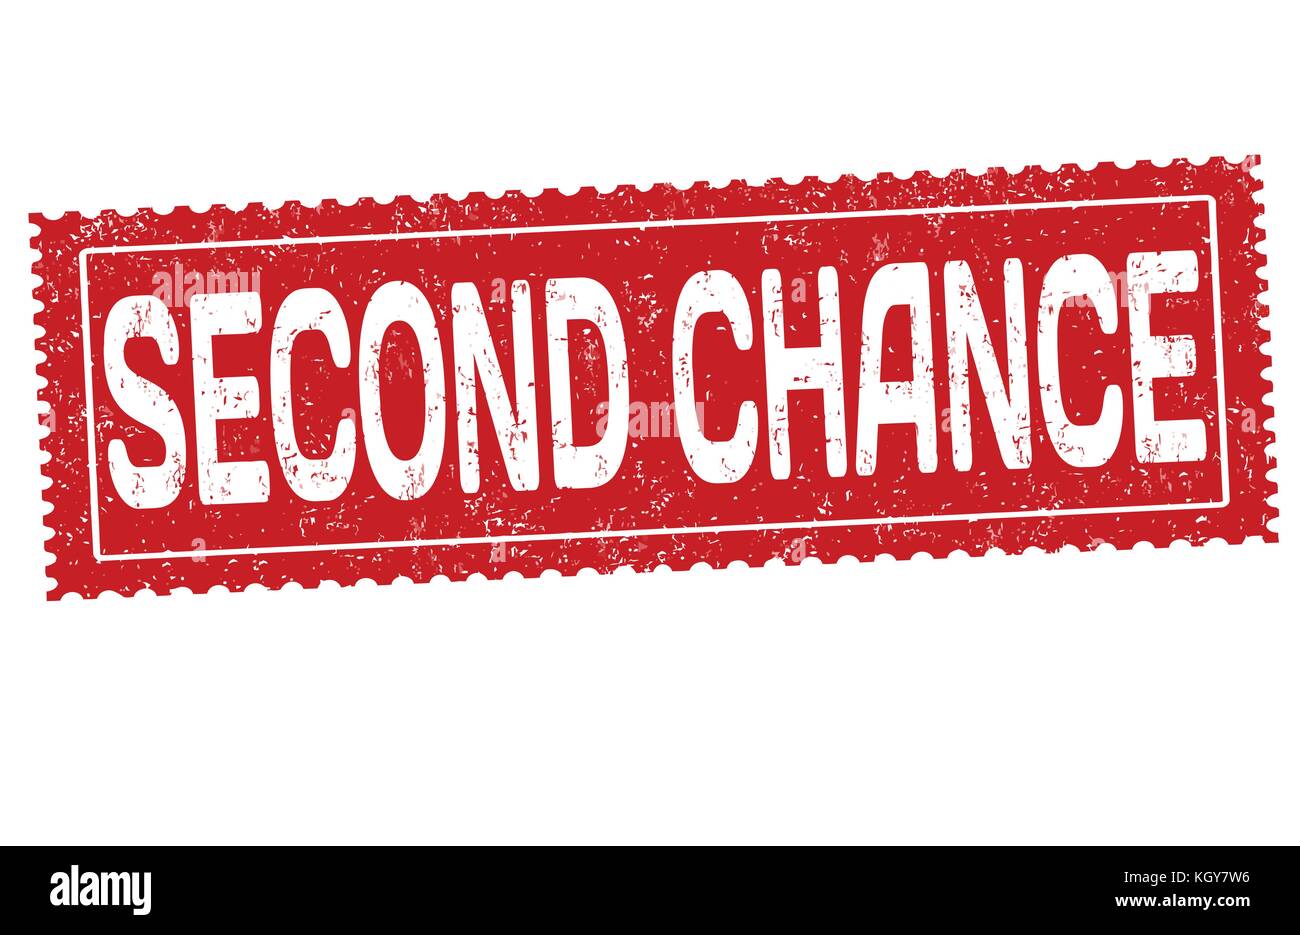 Second chance grunge rubber stamp on white background, vector illustration Stock Vector